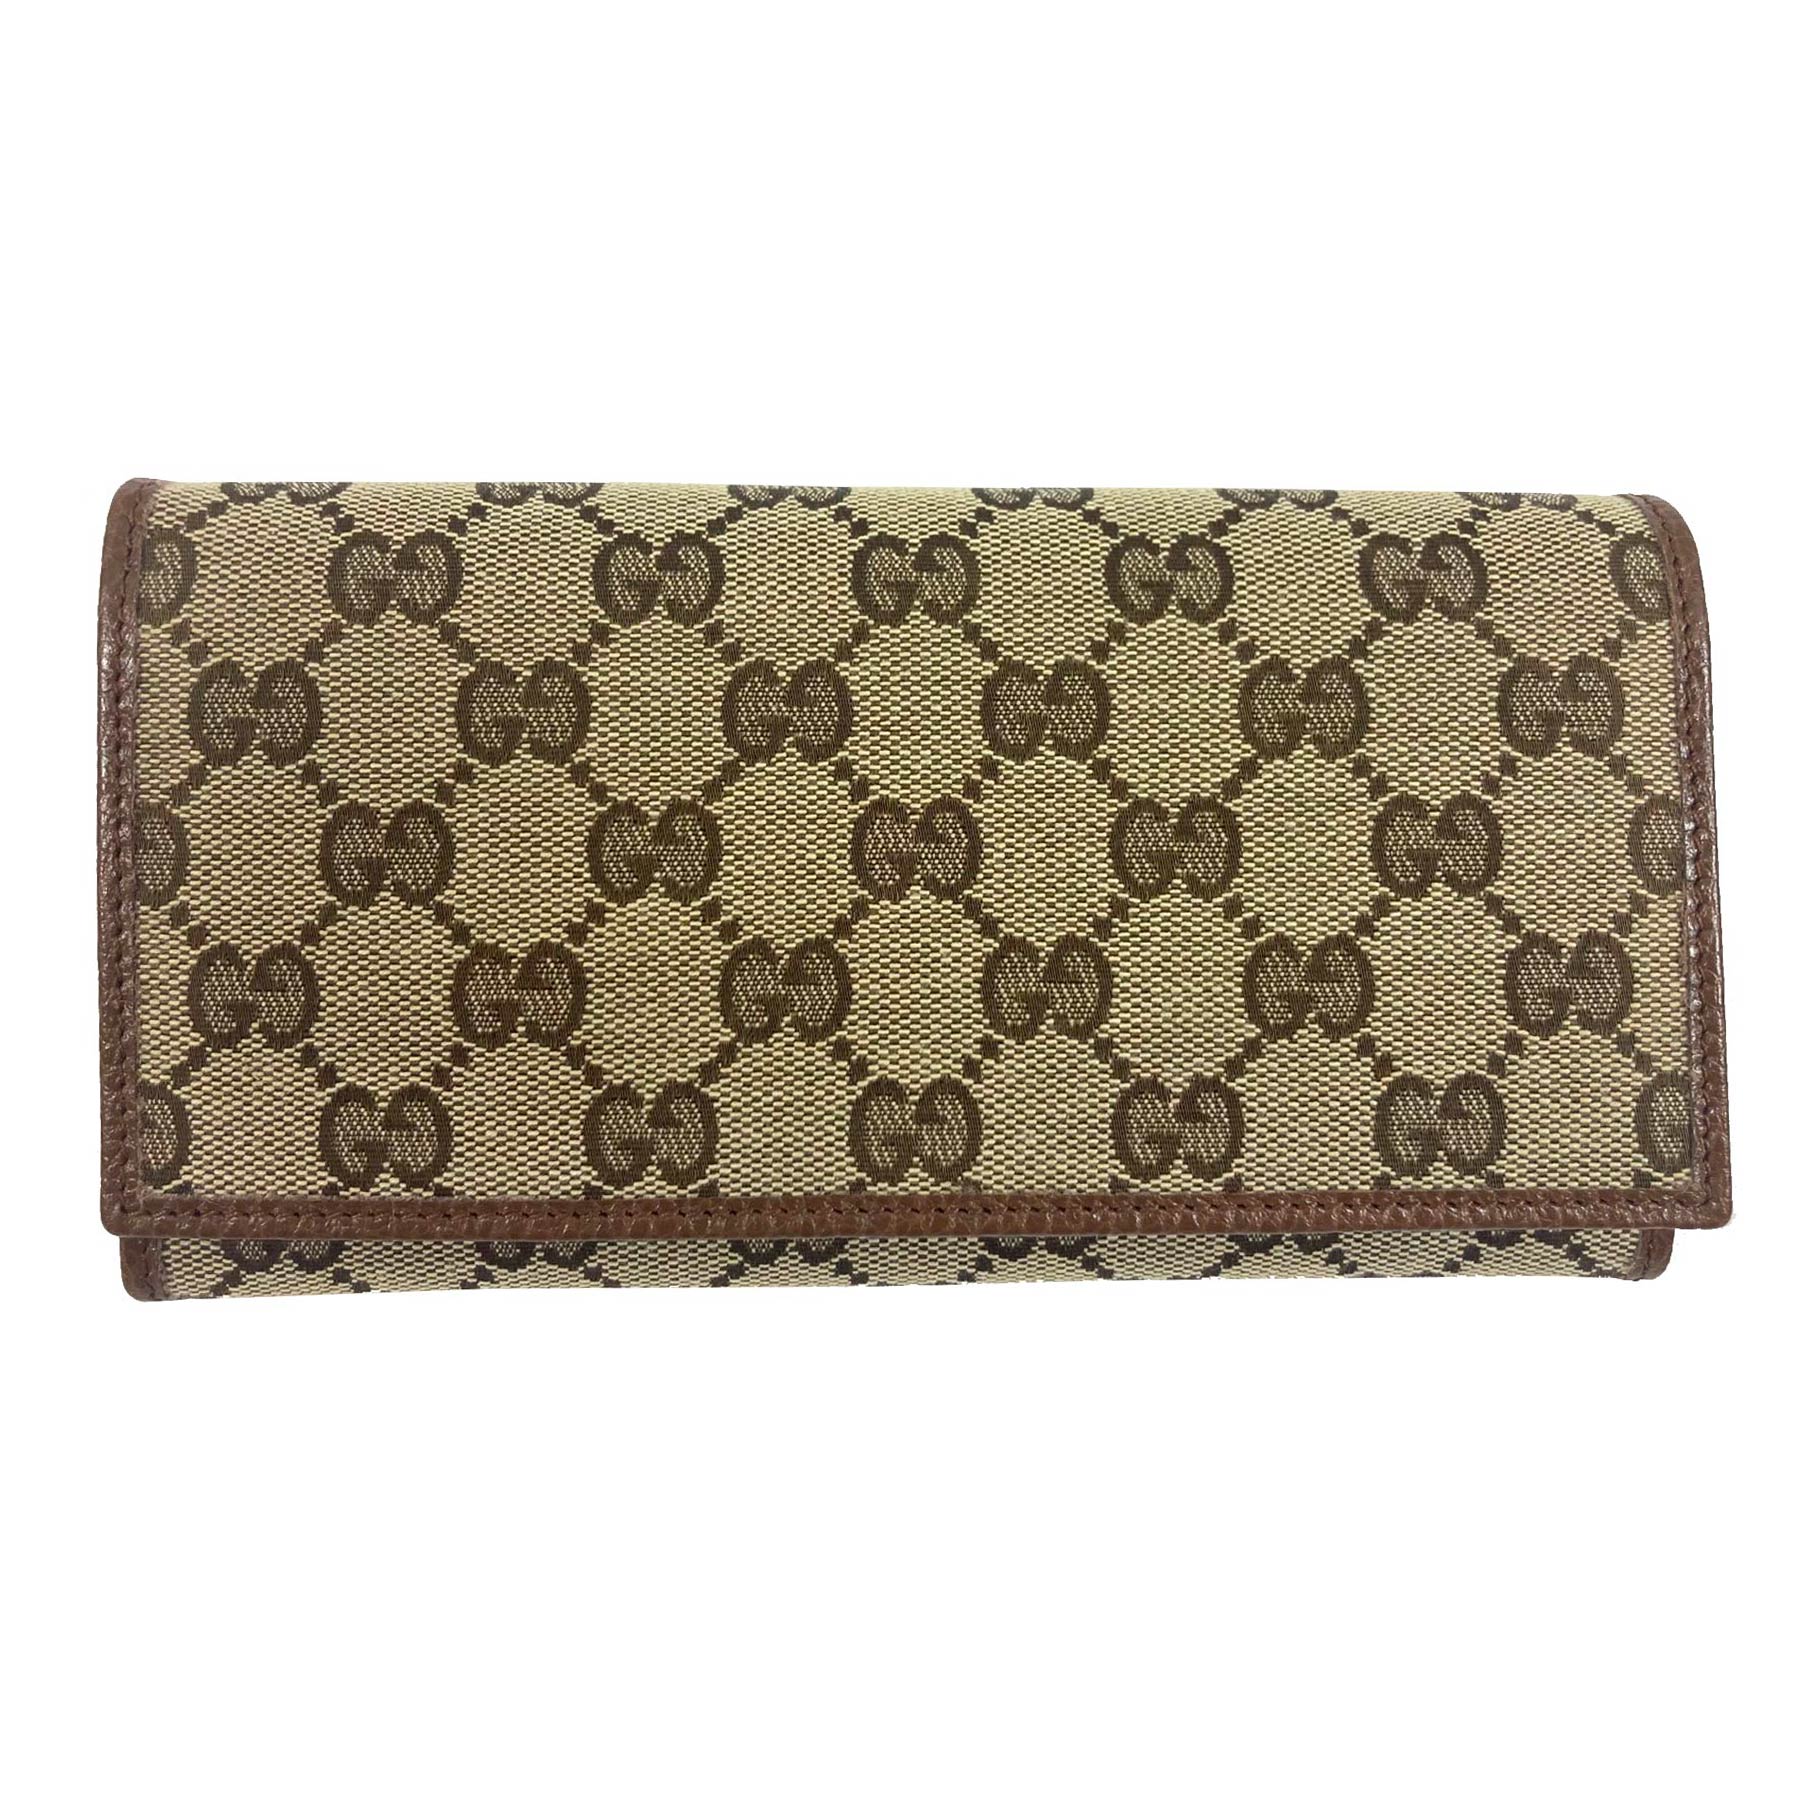 Gucci - 346058_KY9LG - Brown - NOSIZE